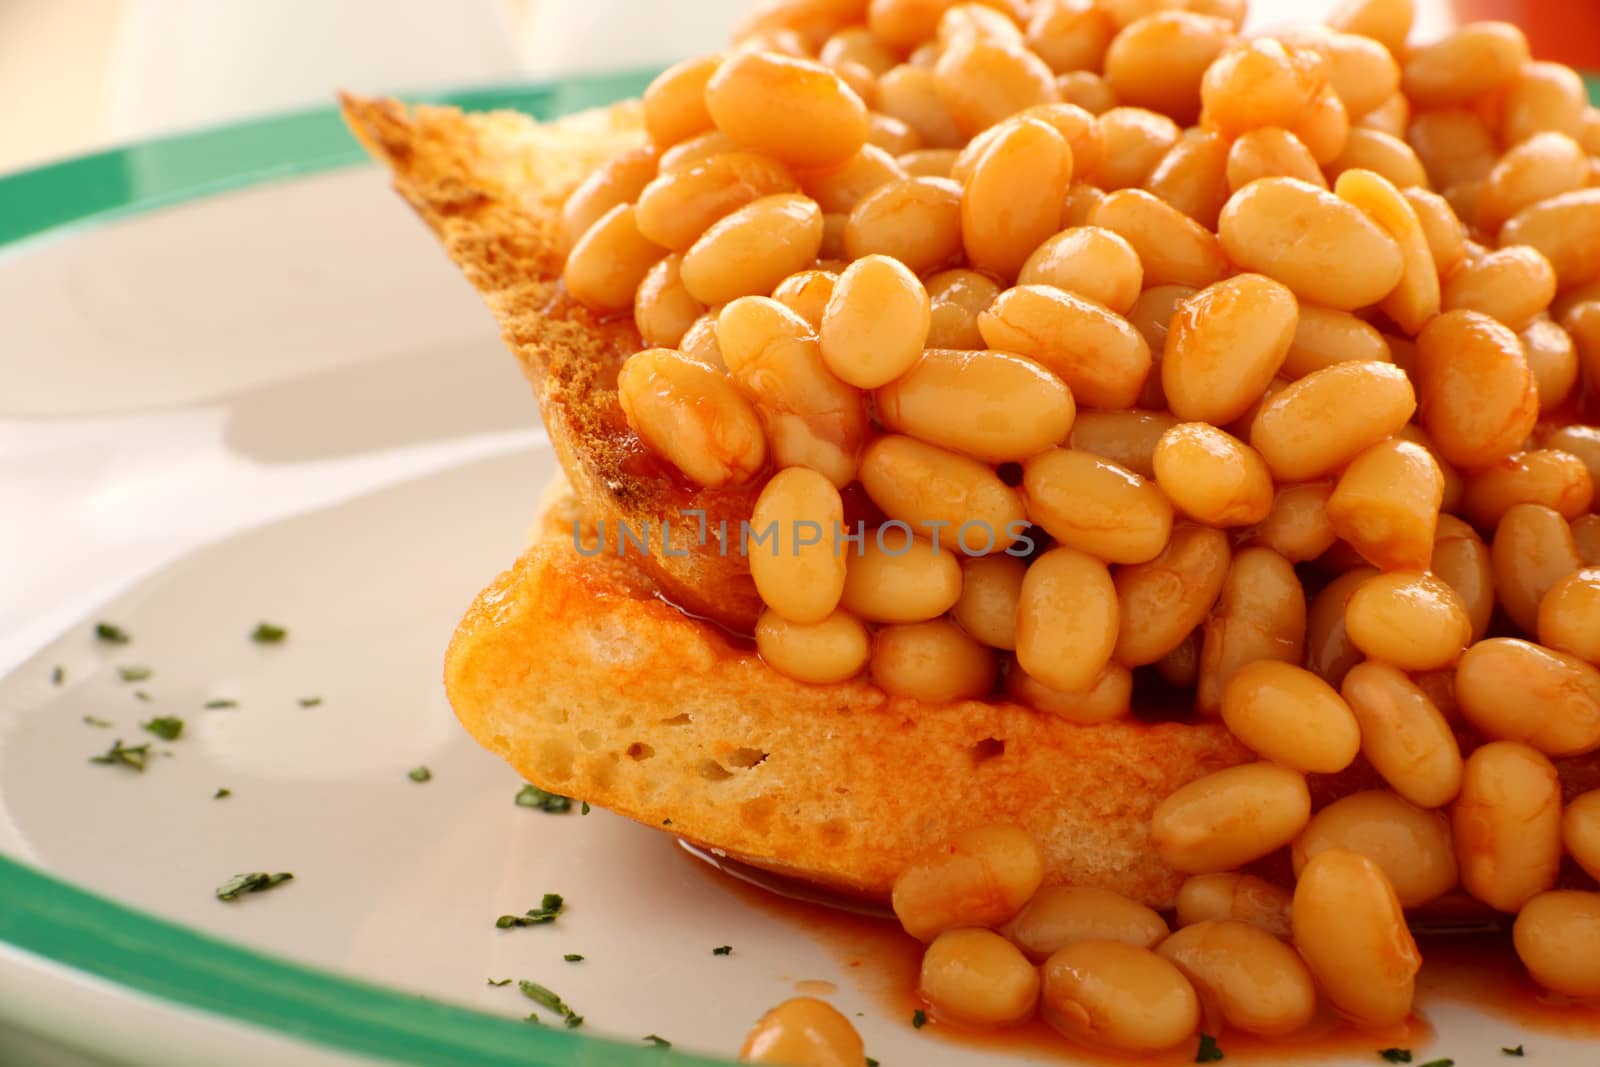 Delicious and simple old fashioned baked beans stack on toast.